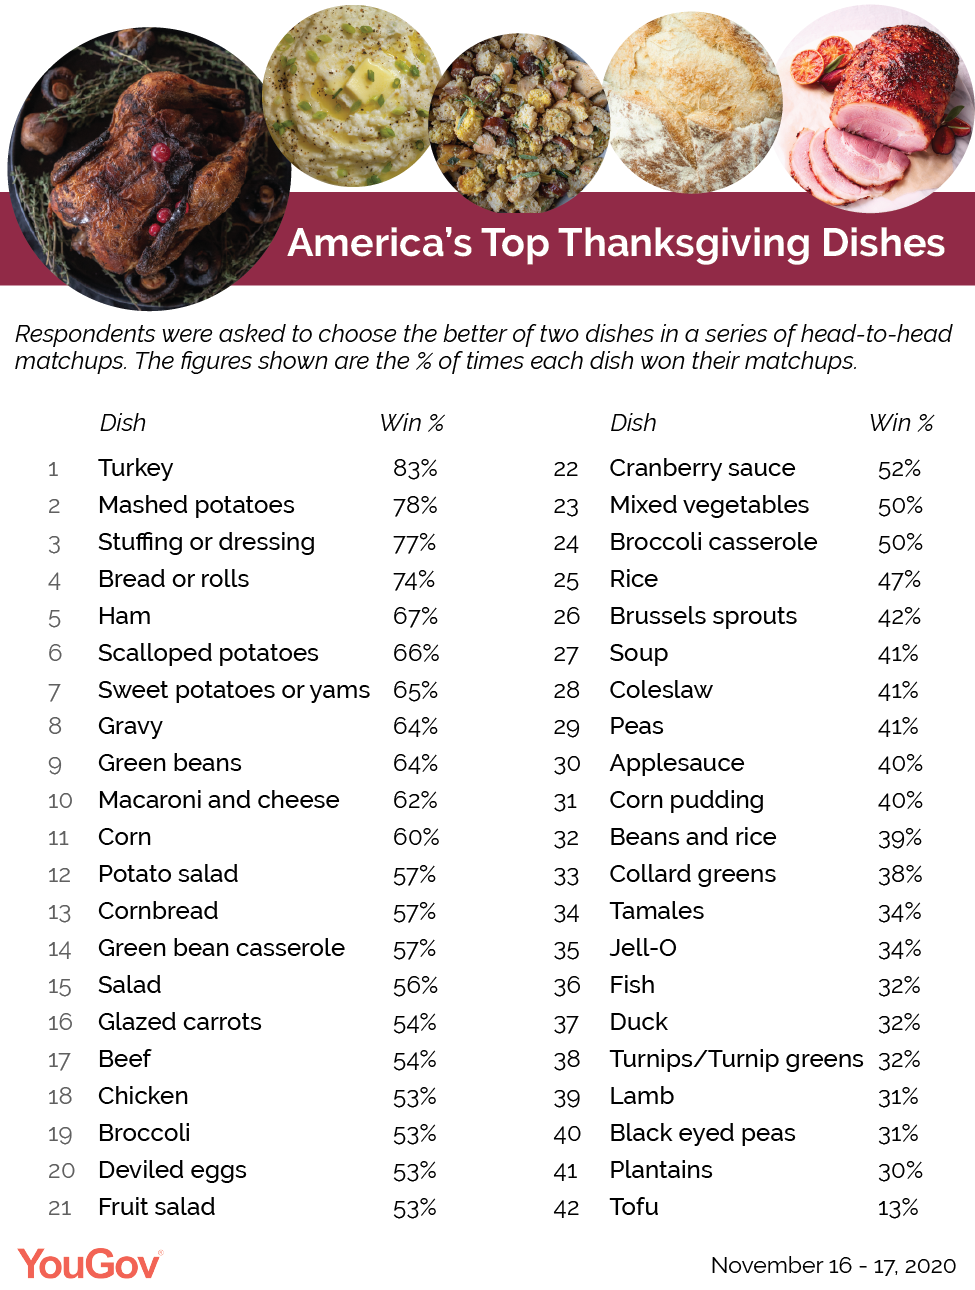 America's favorite Thanksgiving dish is turkey, followed by mashed potatoes